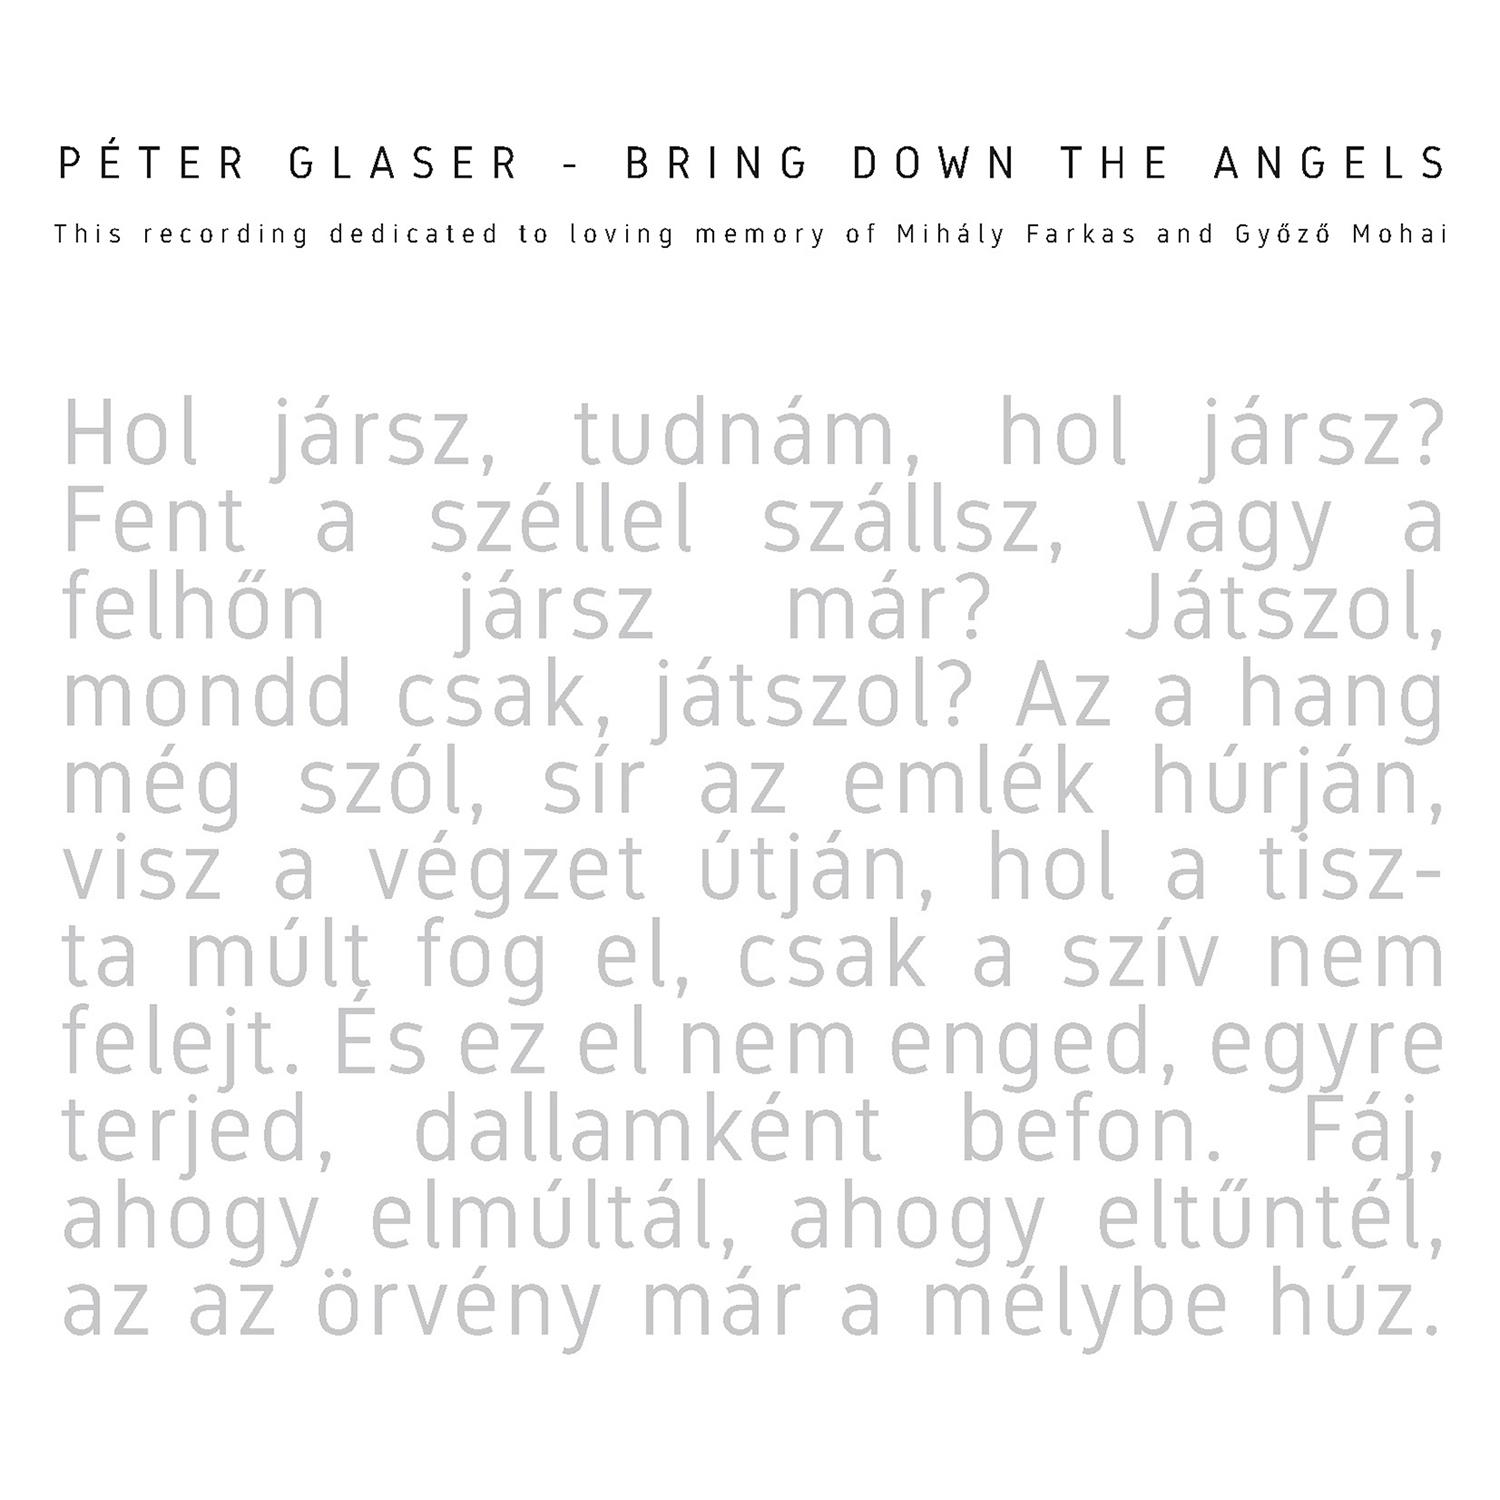 Bring down the Angels This recording is dedicated to loving memory of Miha ly Farkas and Gy z Mohai